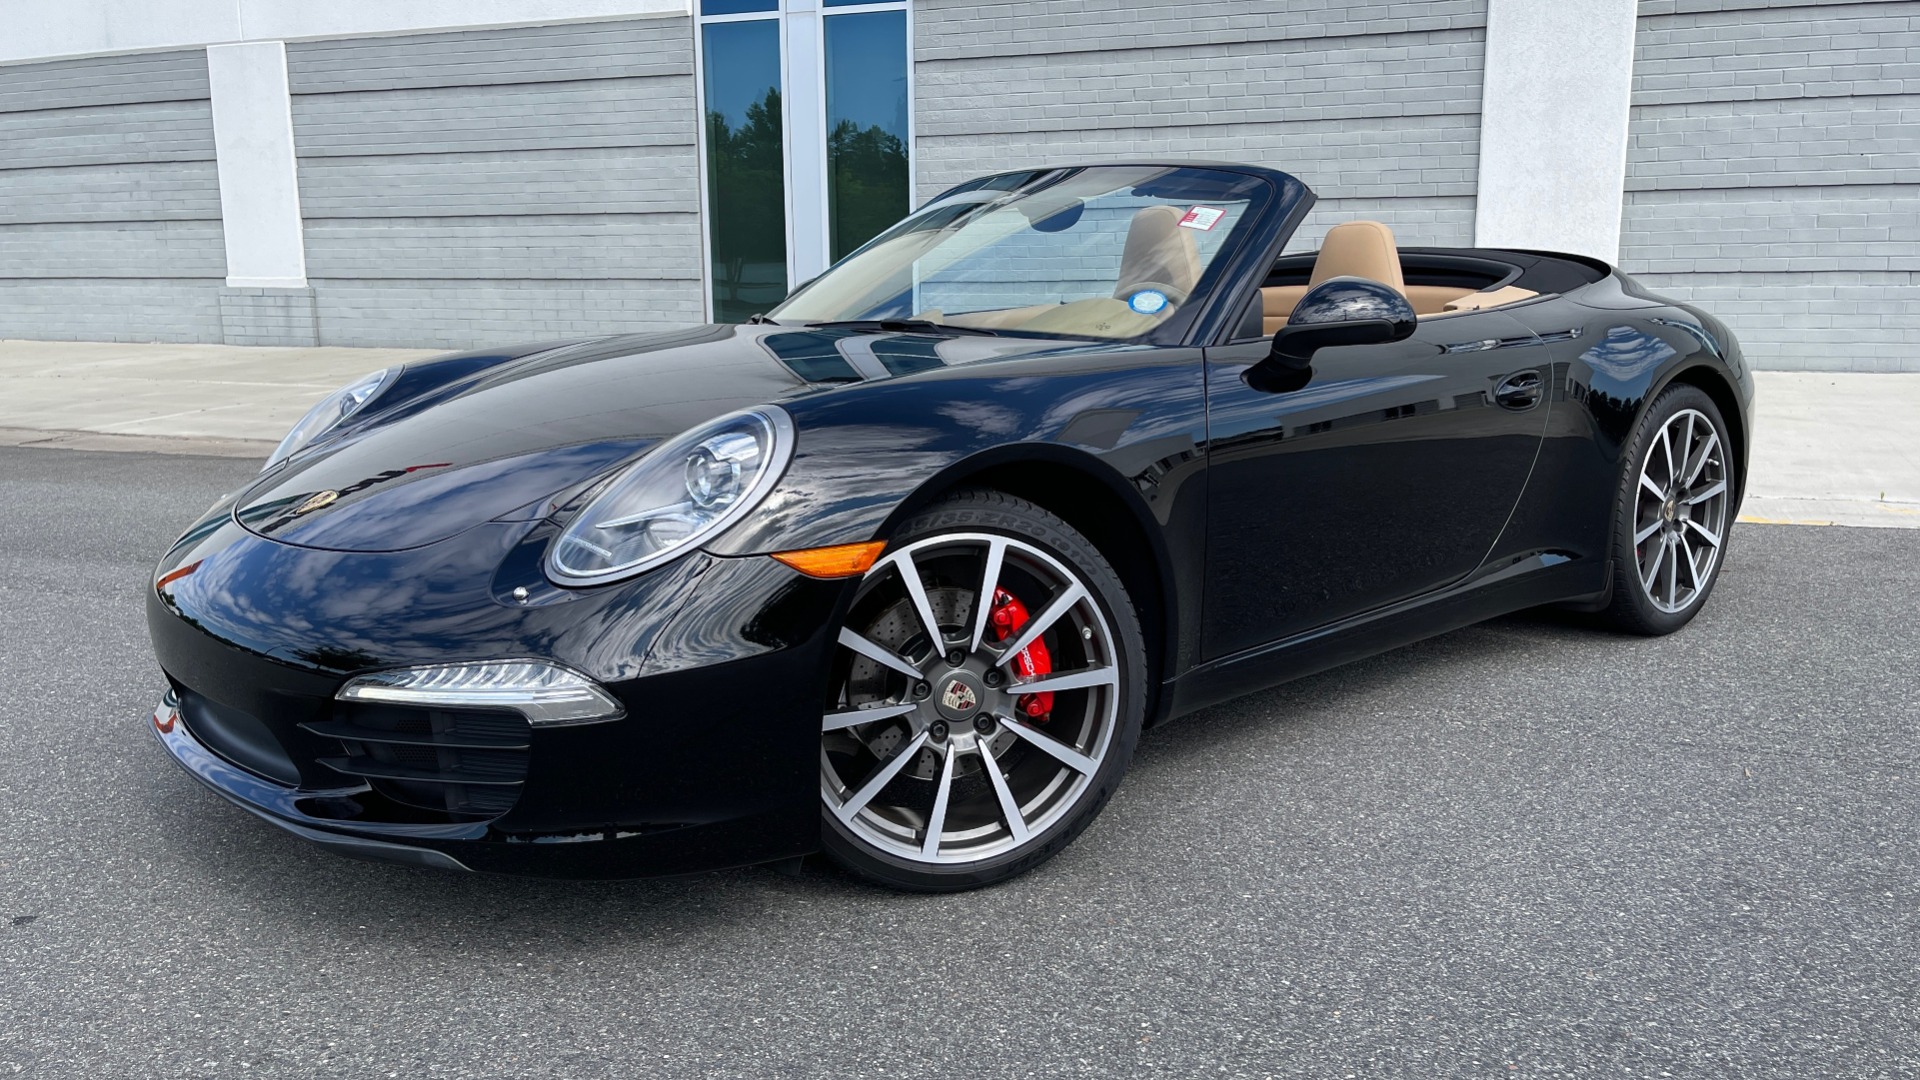 Used 2013 Porsche 911 Carrera PDK//SPORT CHRONO // PWR STEERING PLUS for sale Sold at Formula Imports in Charlotte NC 28227 1